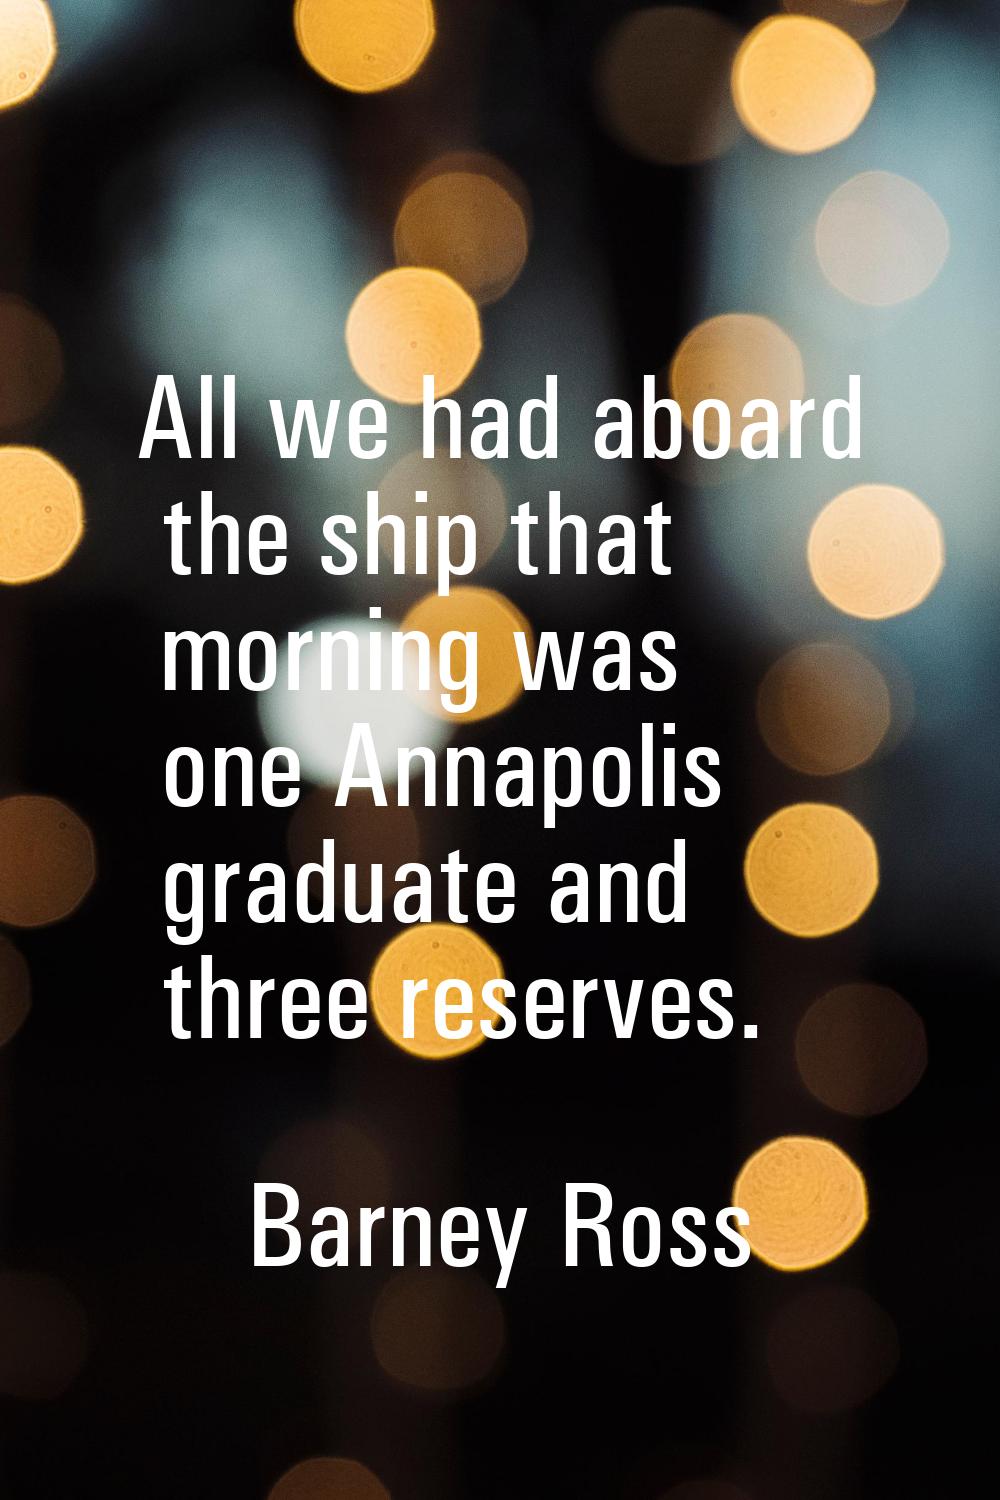 All we had aboard the ship that morning was one Annapolis graduate and three reserves.